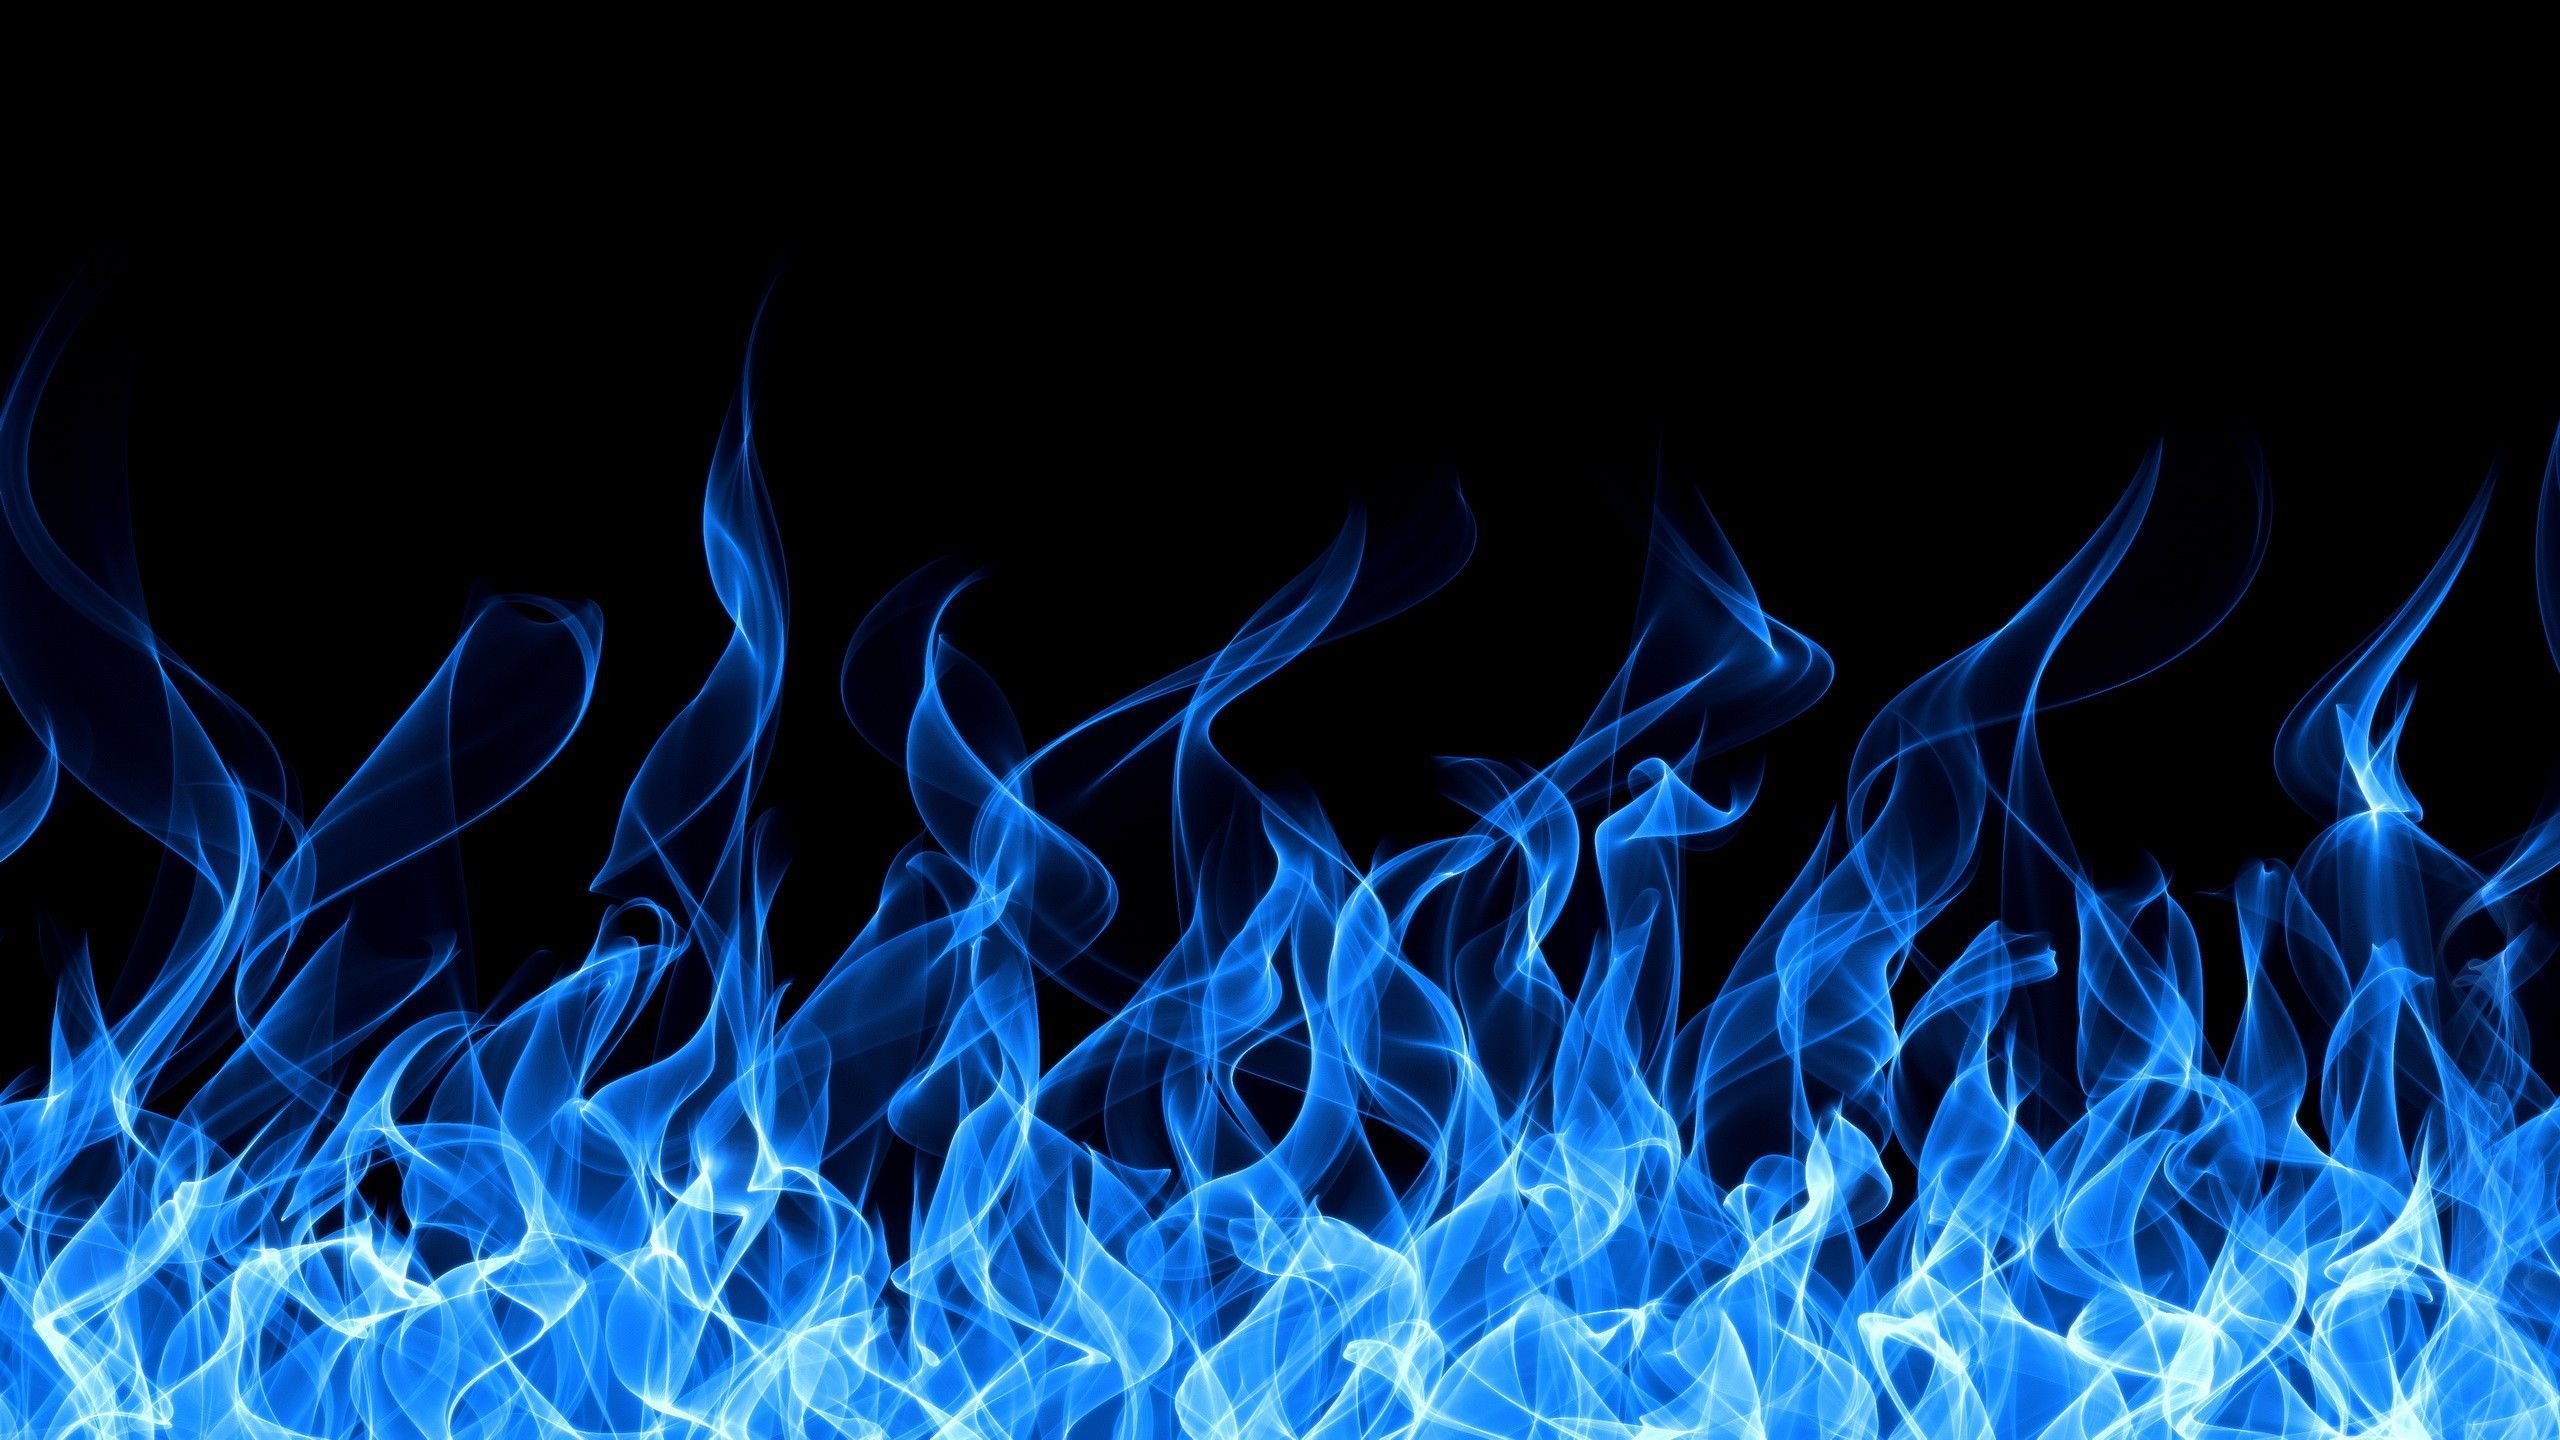 Flames Eyes Wallpaper Free 2560X1440 Flames Eyes Background